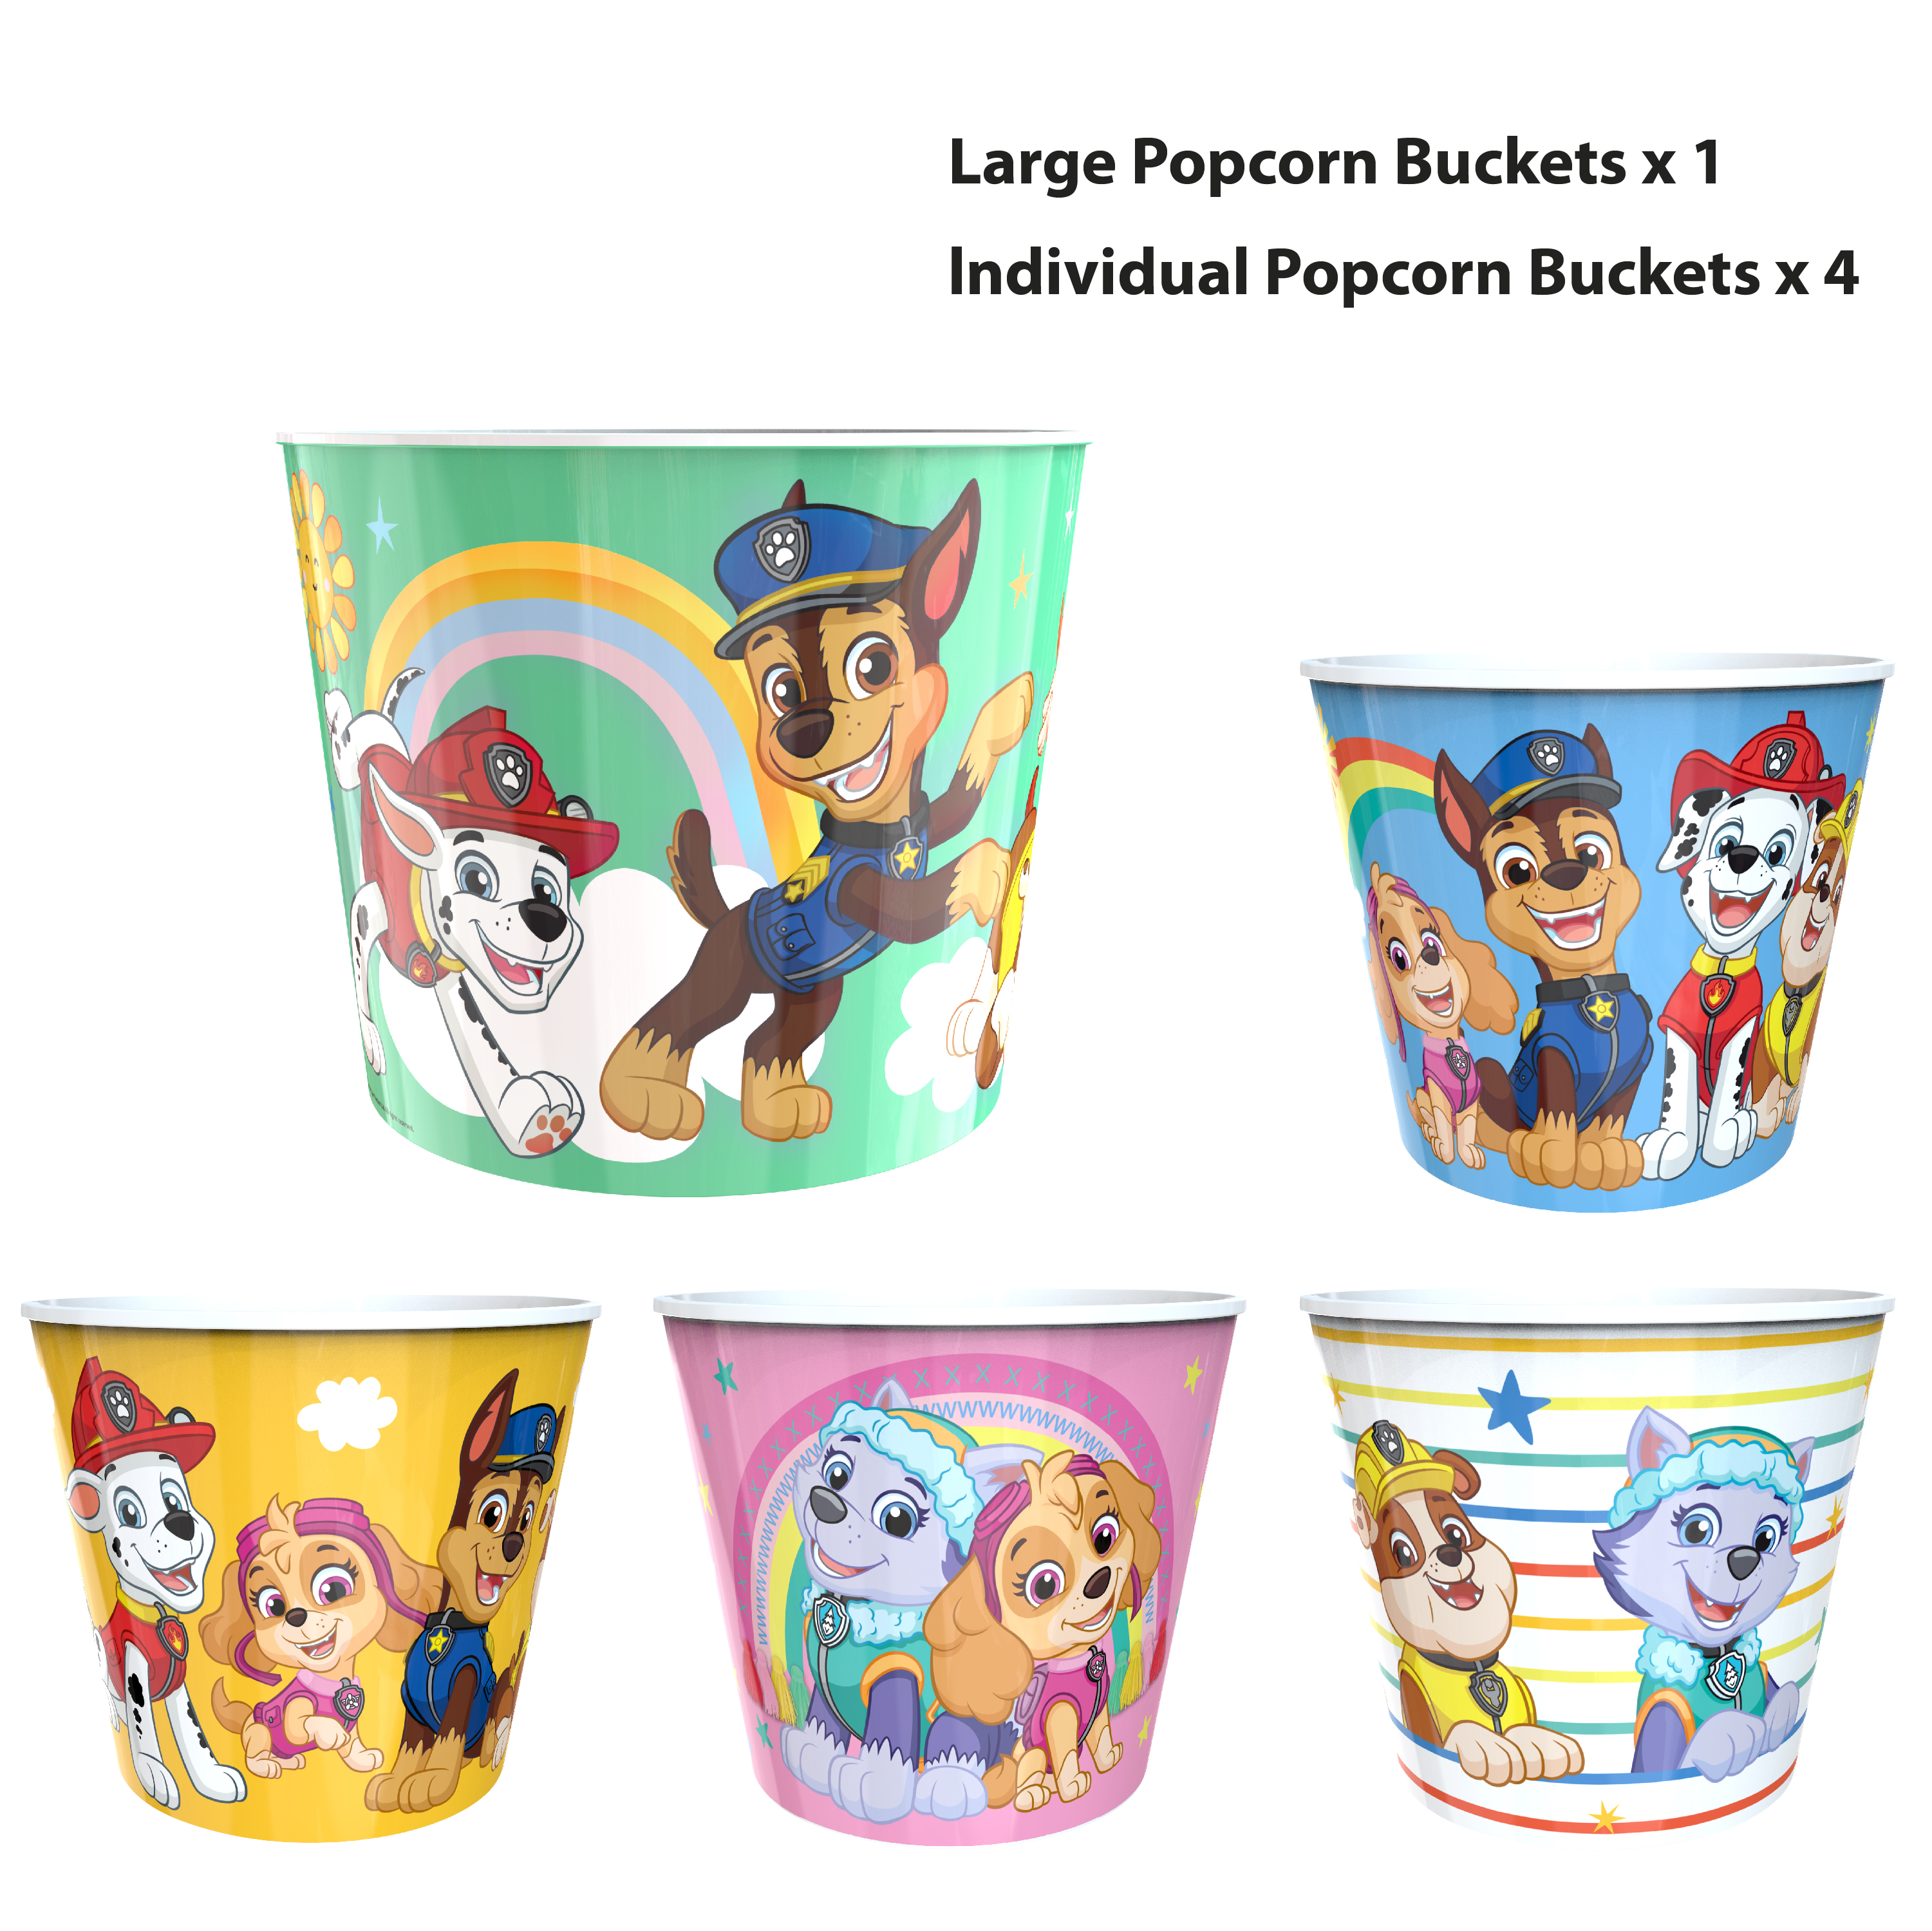 Paw Patrol Plastic Popcorn Container and Bowls, Chase, Marshall and Friends, 5-piece set slideshow image 9